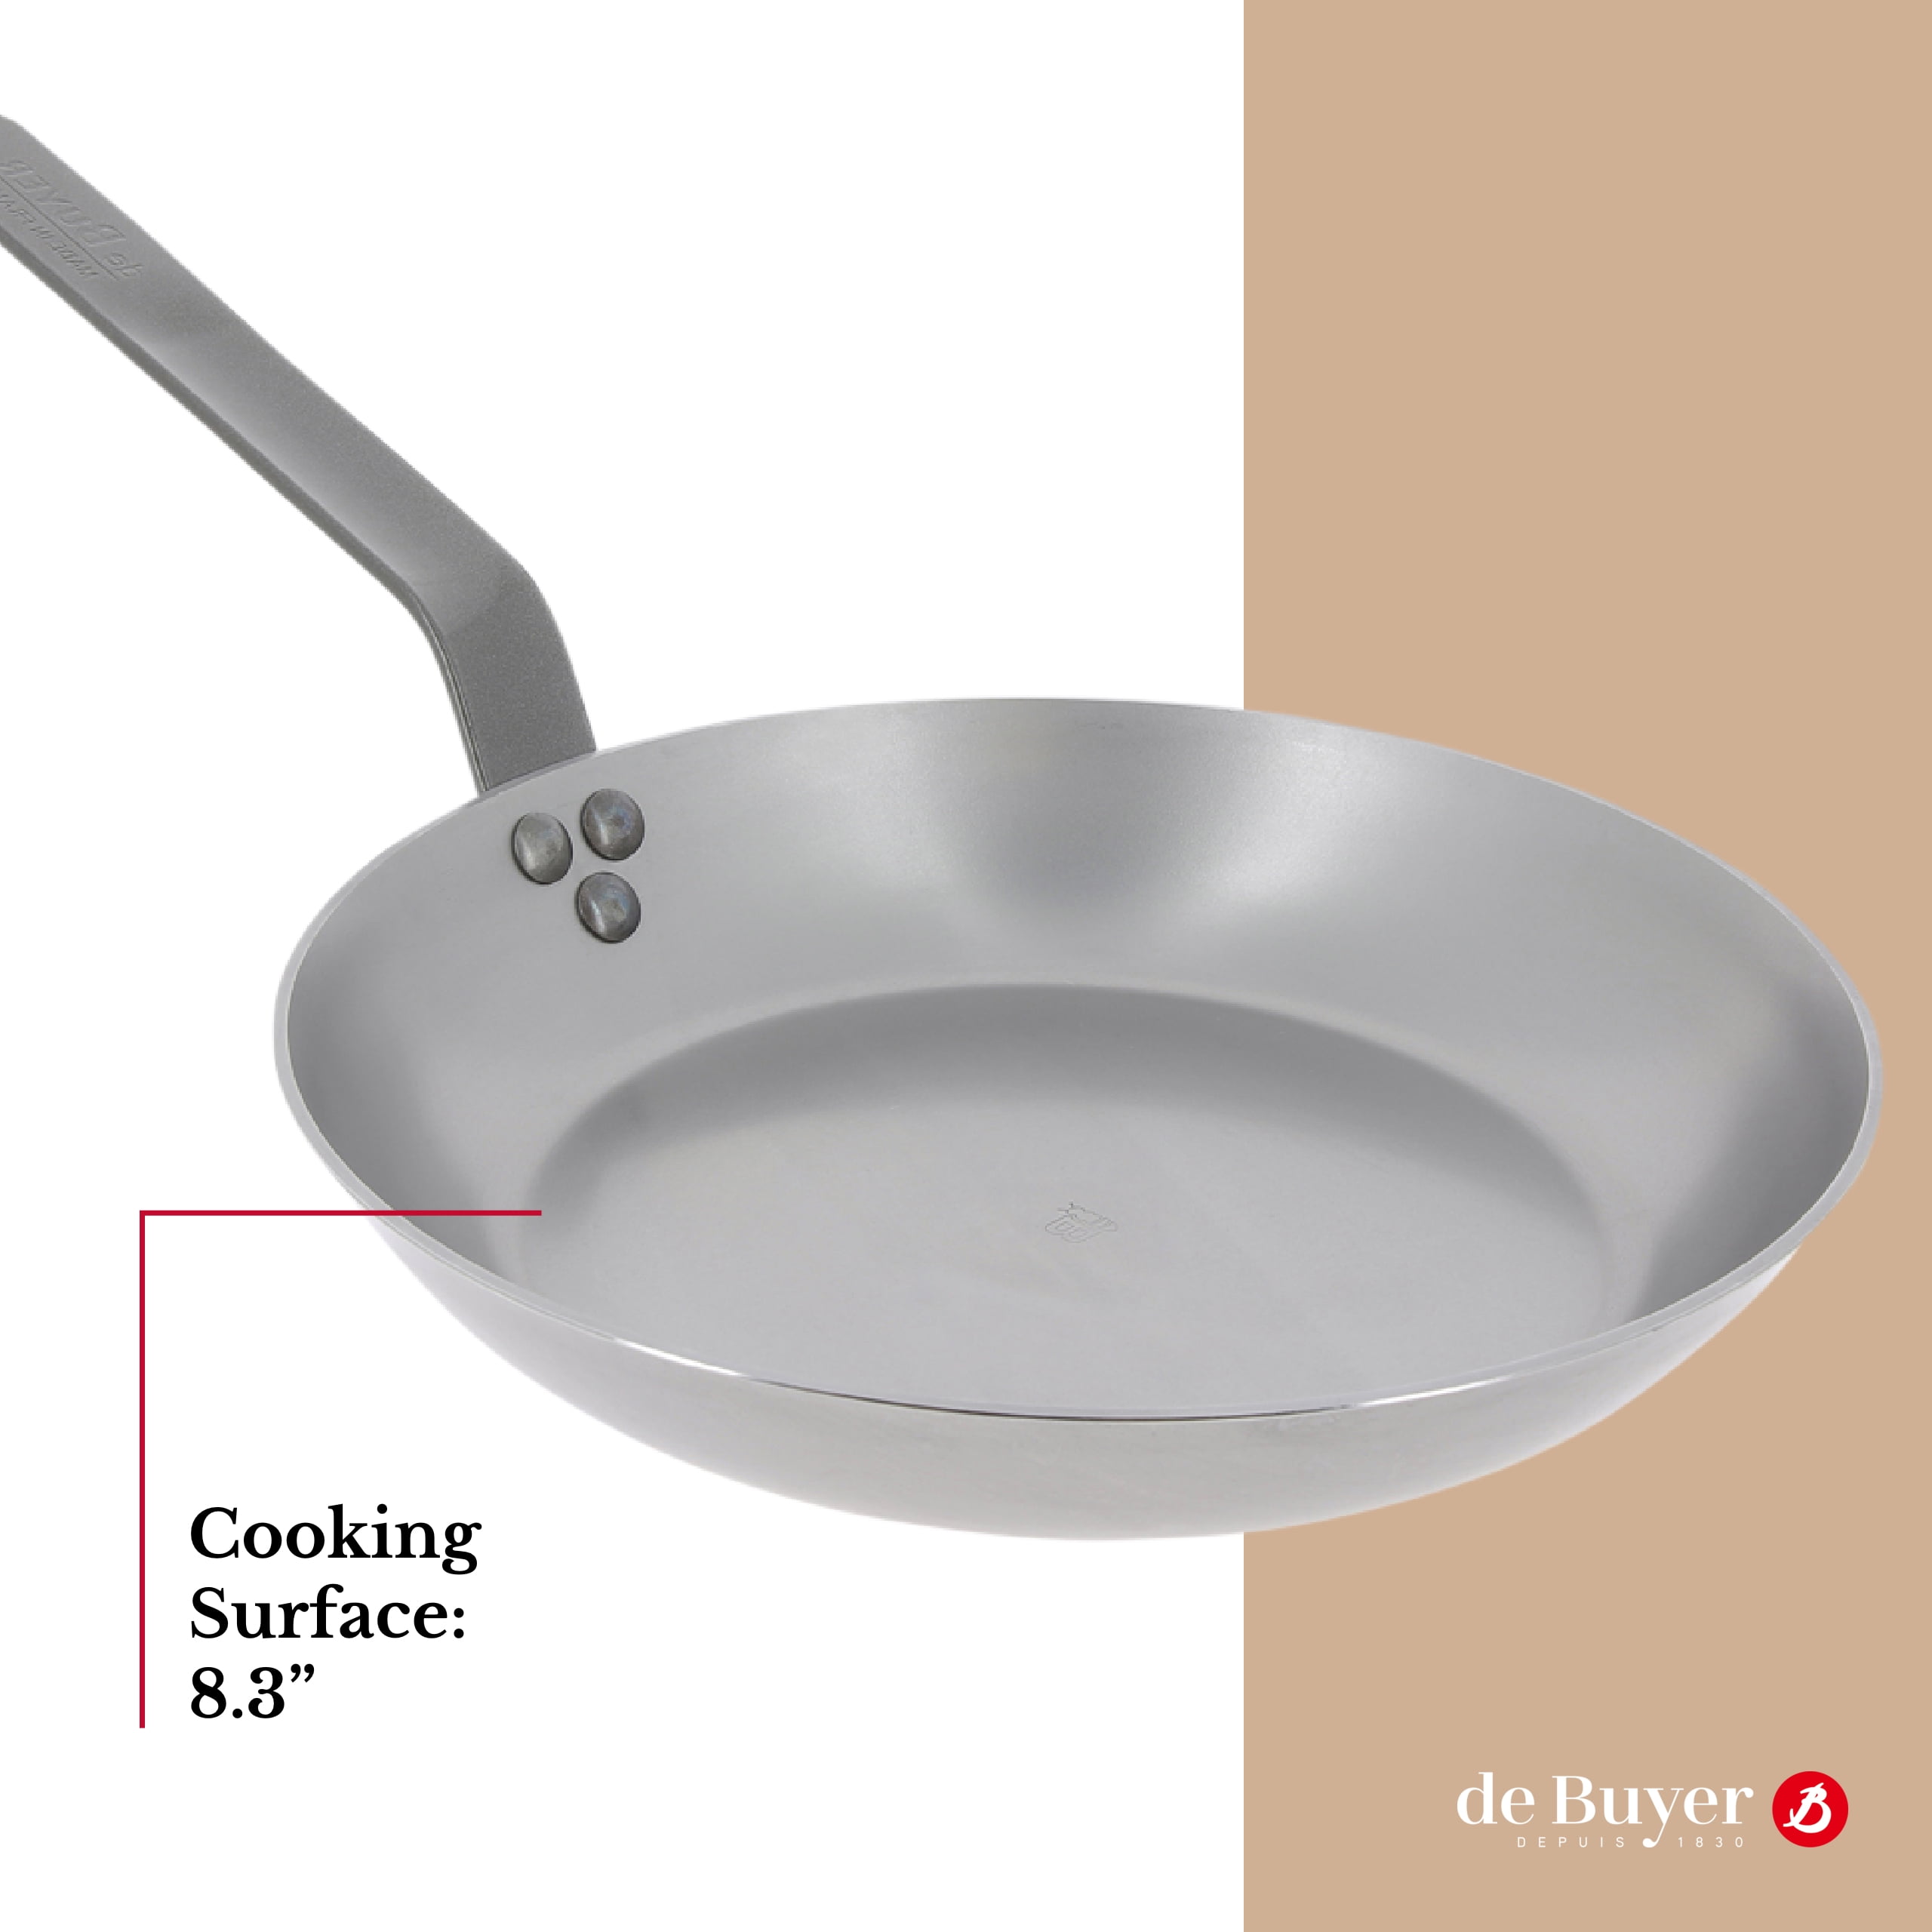 de Buyer MINERAL B Carbon Steel Omelette Pan - 11” - Naturally Nonstick -  Made in France